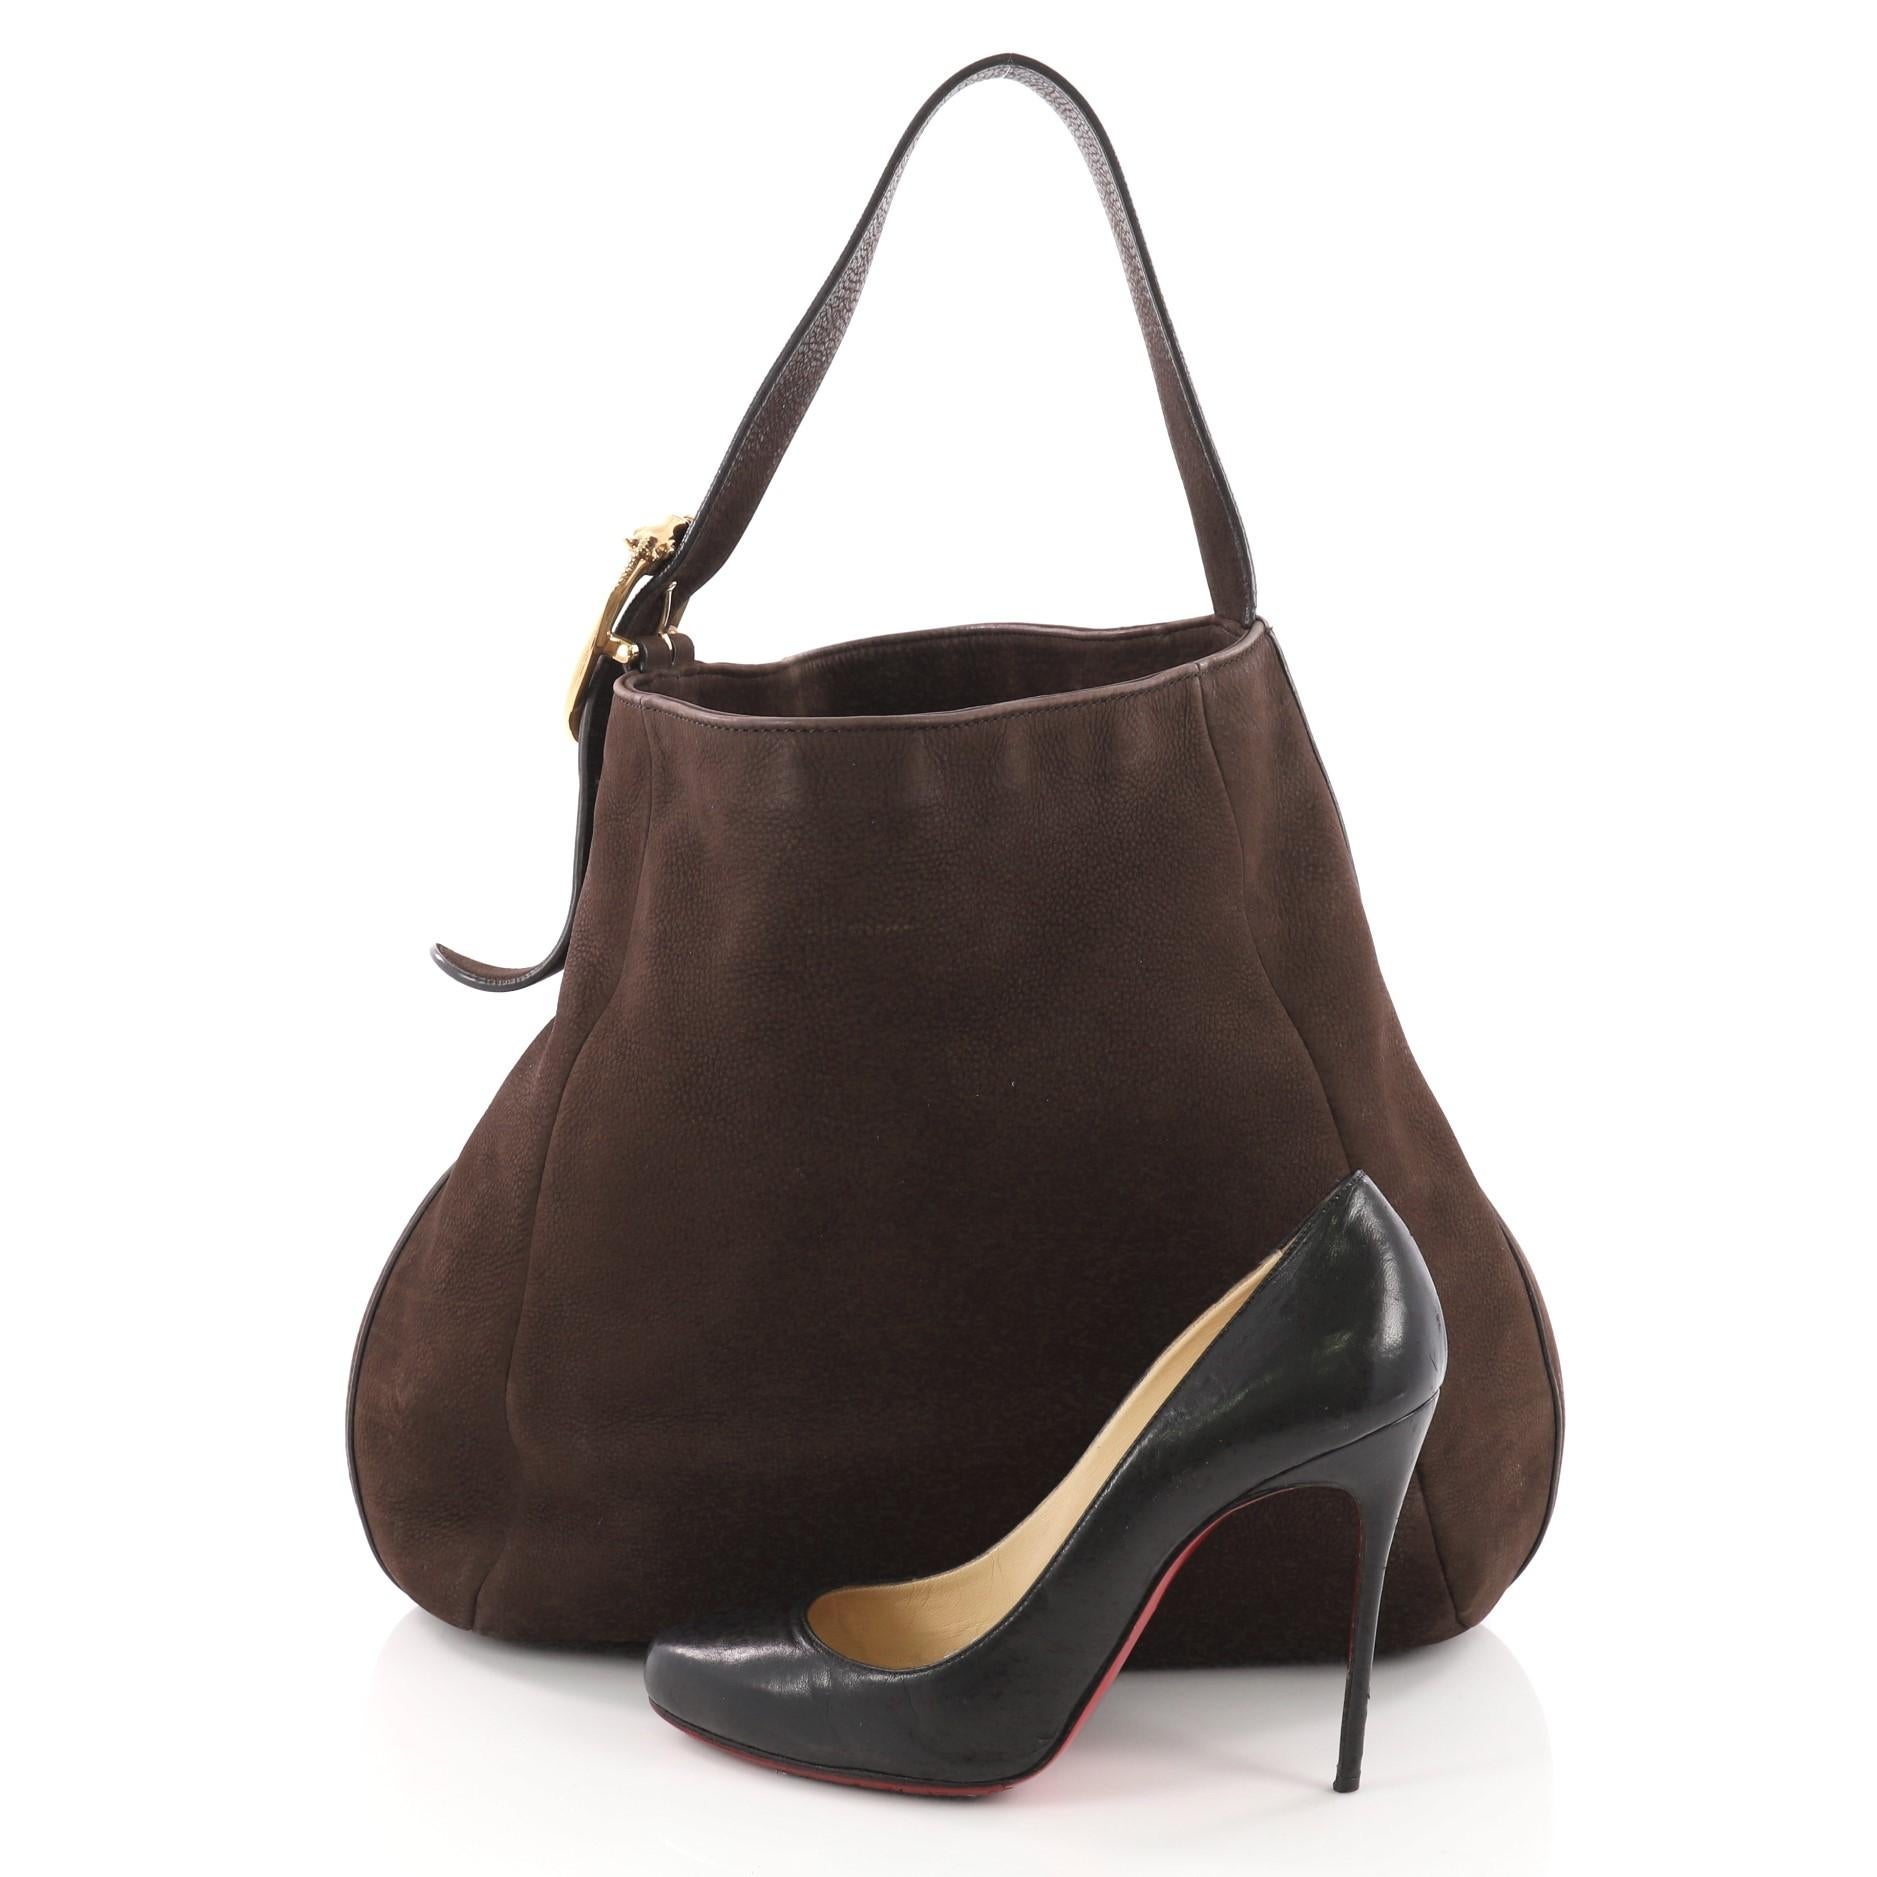 This authentic Gucci Ribot Horse Heads Hobo Nubuck Large is perfect for everyday use. Crafted from brown nubuck leather, this traditionally-shaped hobo features flat shoulder strap with double horse head buckle embellishment and gold-tone hardware